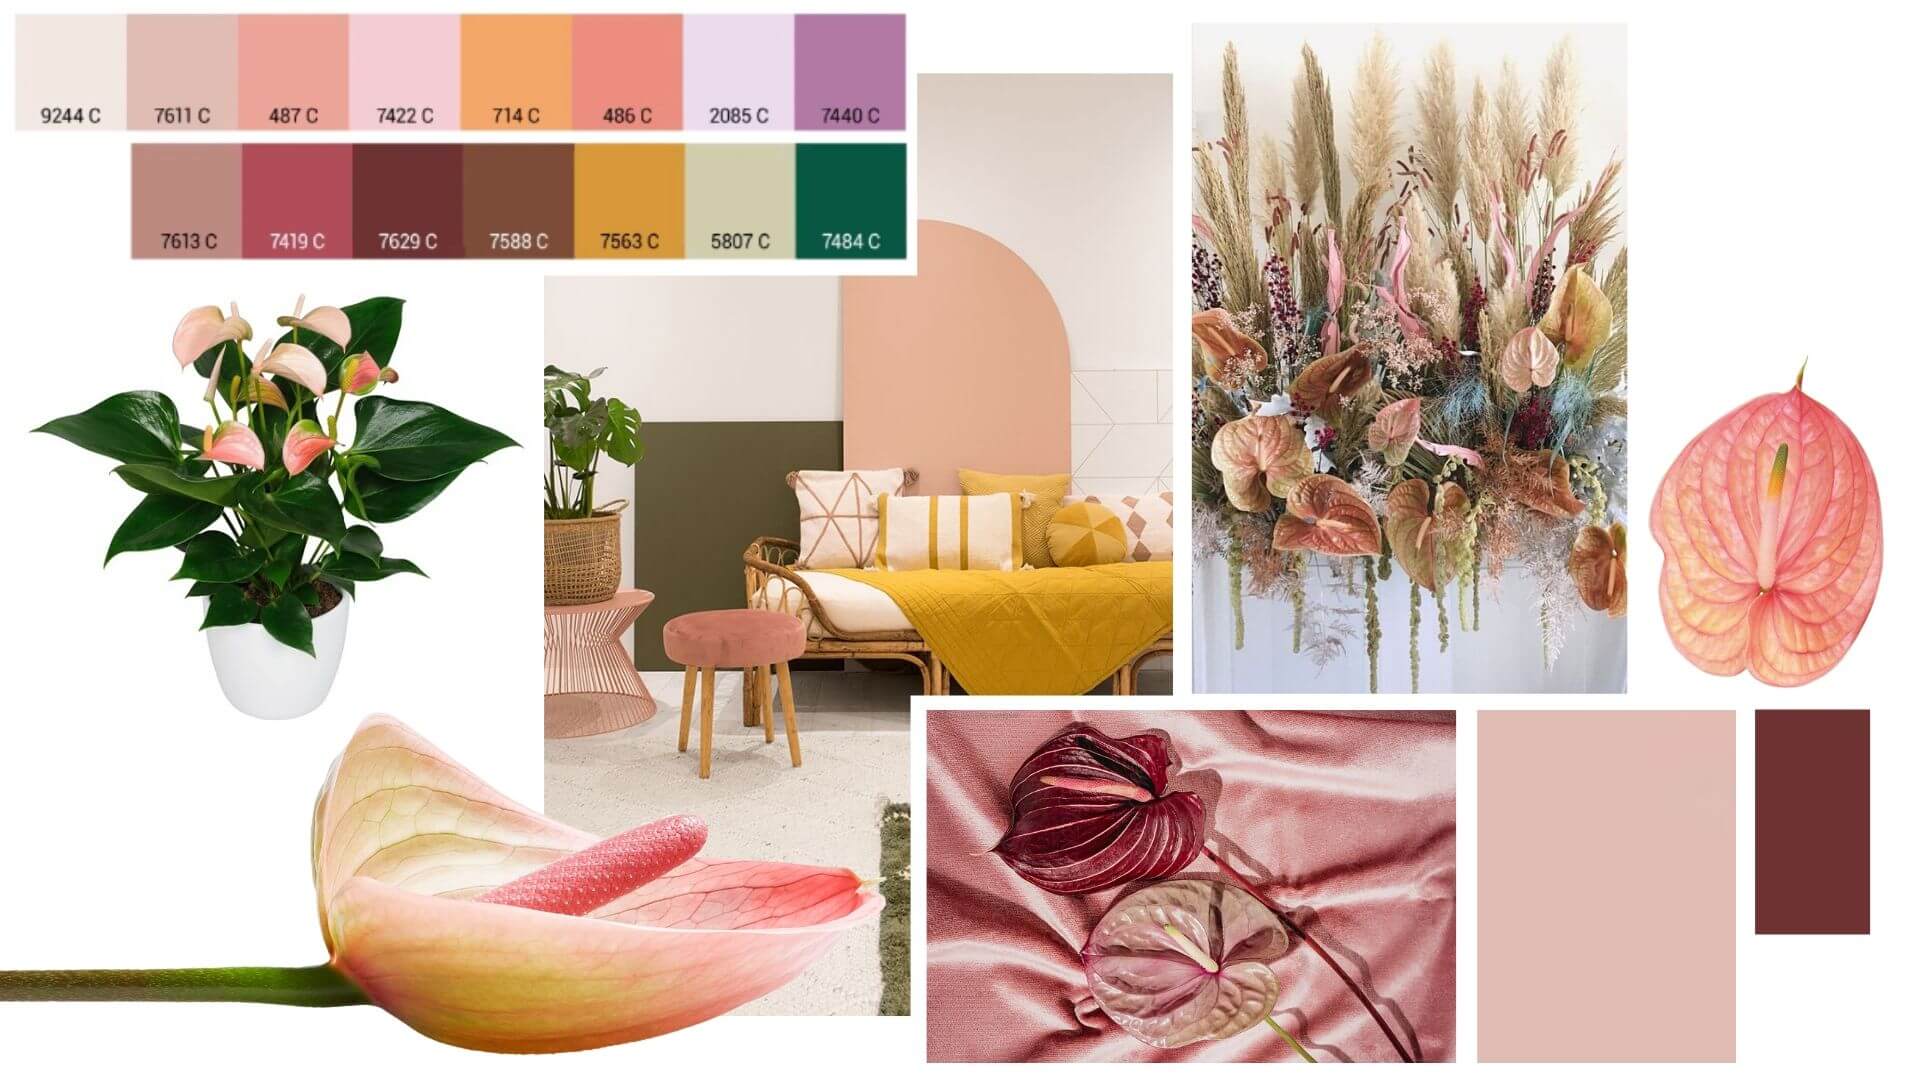 The style trends for the flower and plant sector in 2021